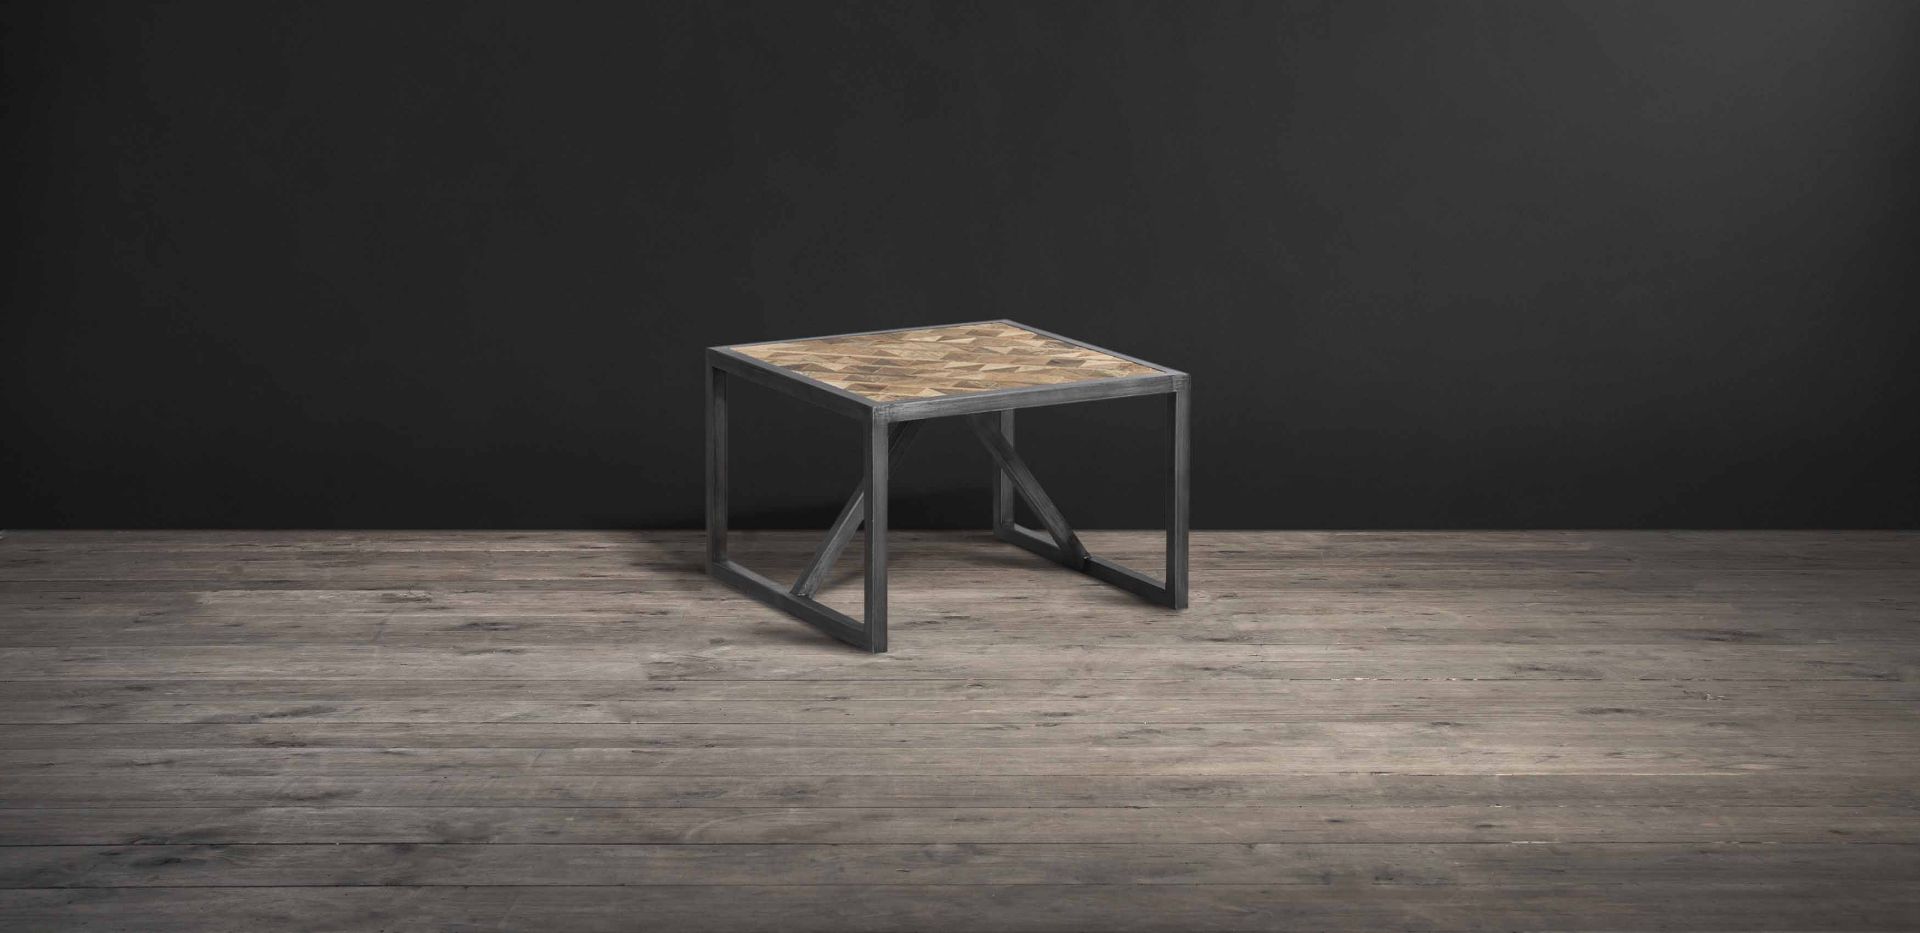 Vestige Industrial Side Table “A modern take on old timber” A classic vintage material is given a